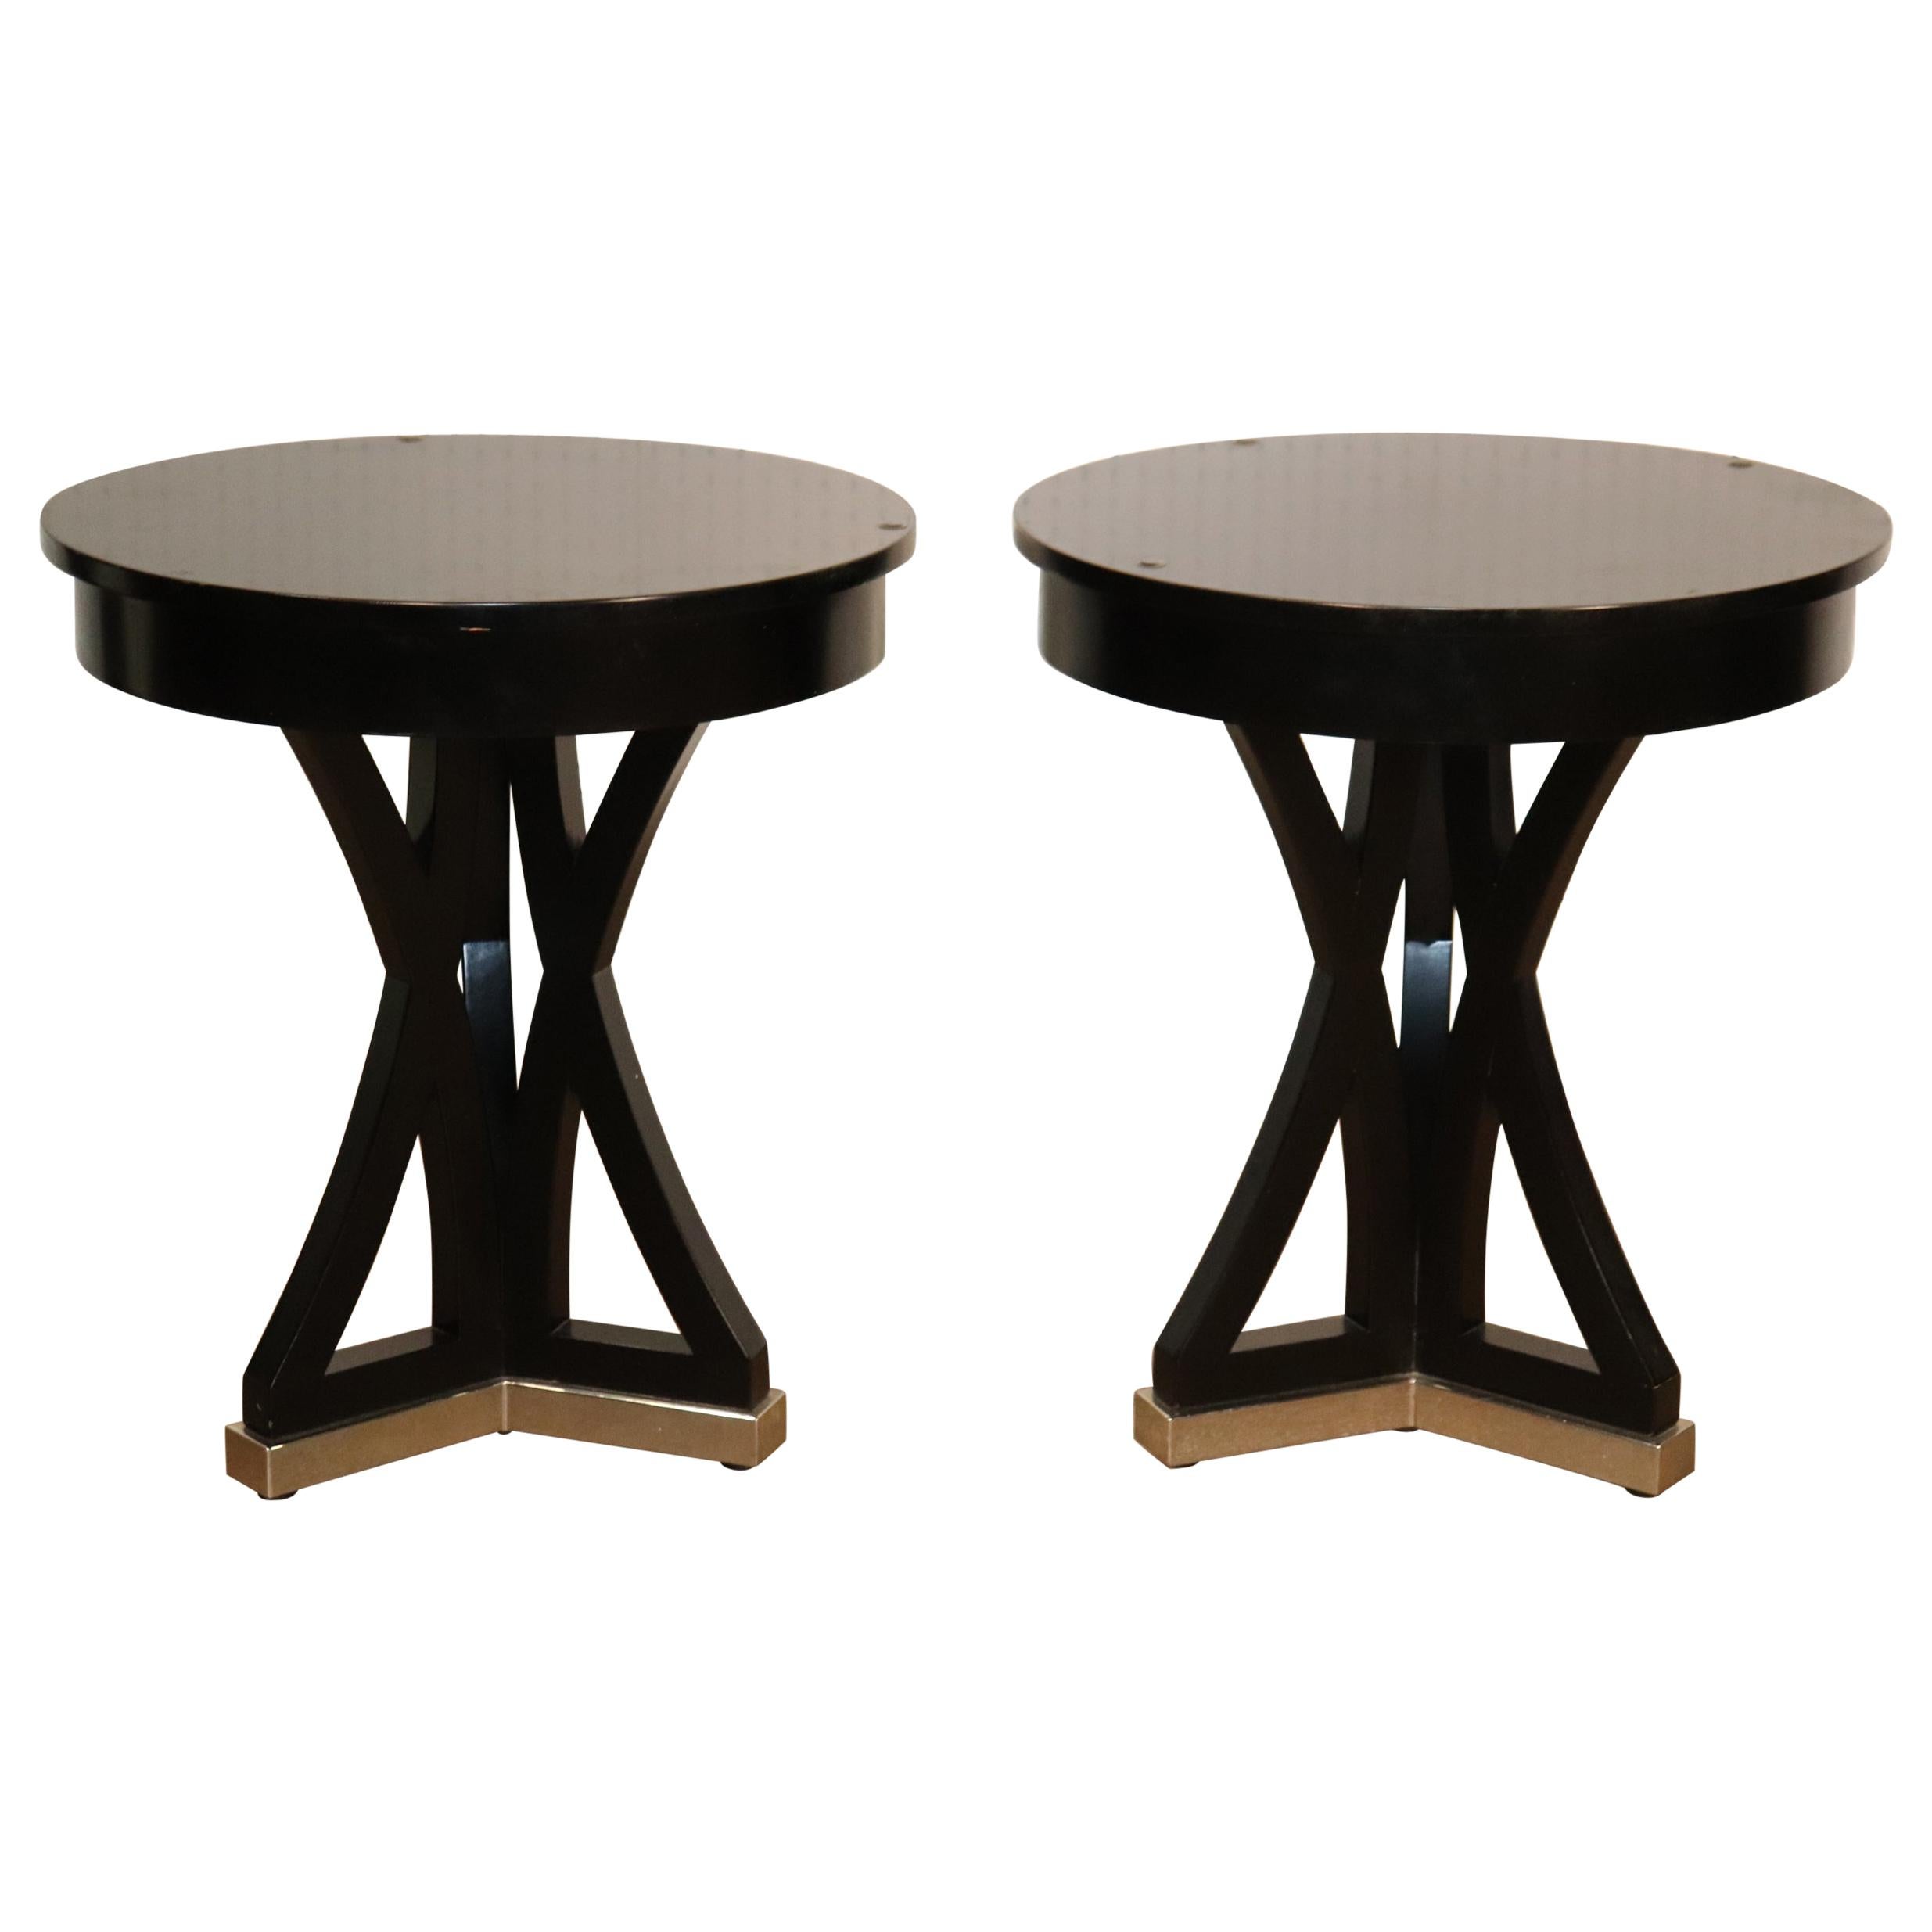 Pair of Black Contemporary Round End Tables with Metal Bases